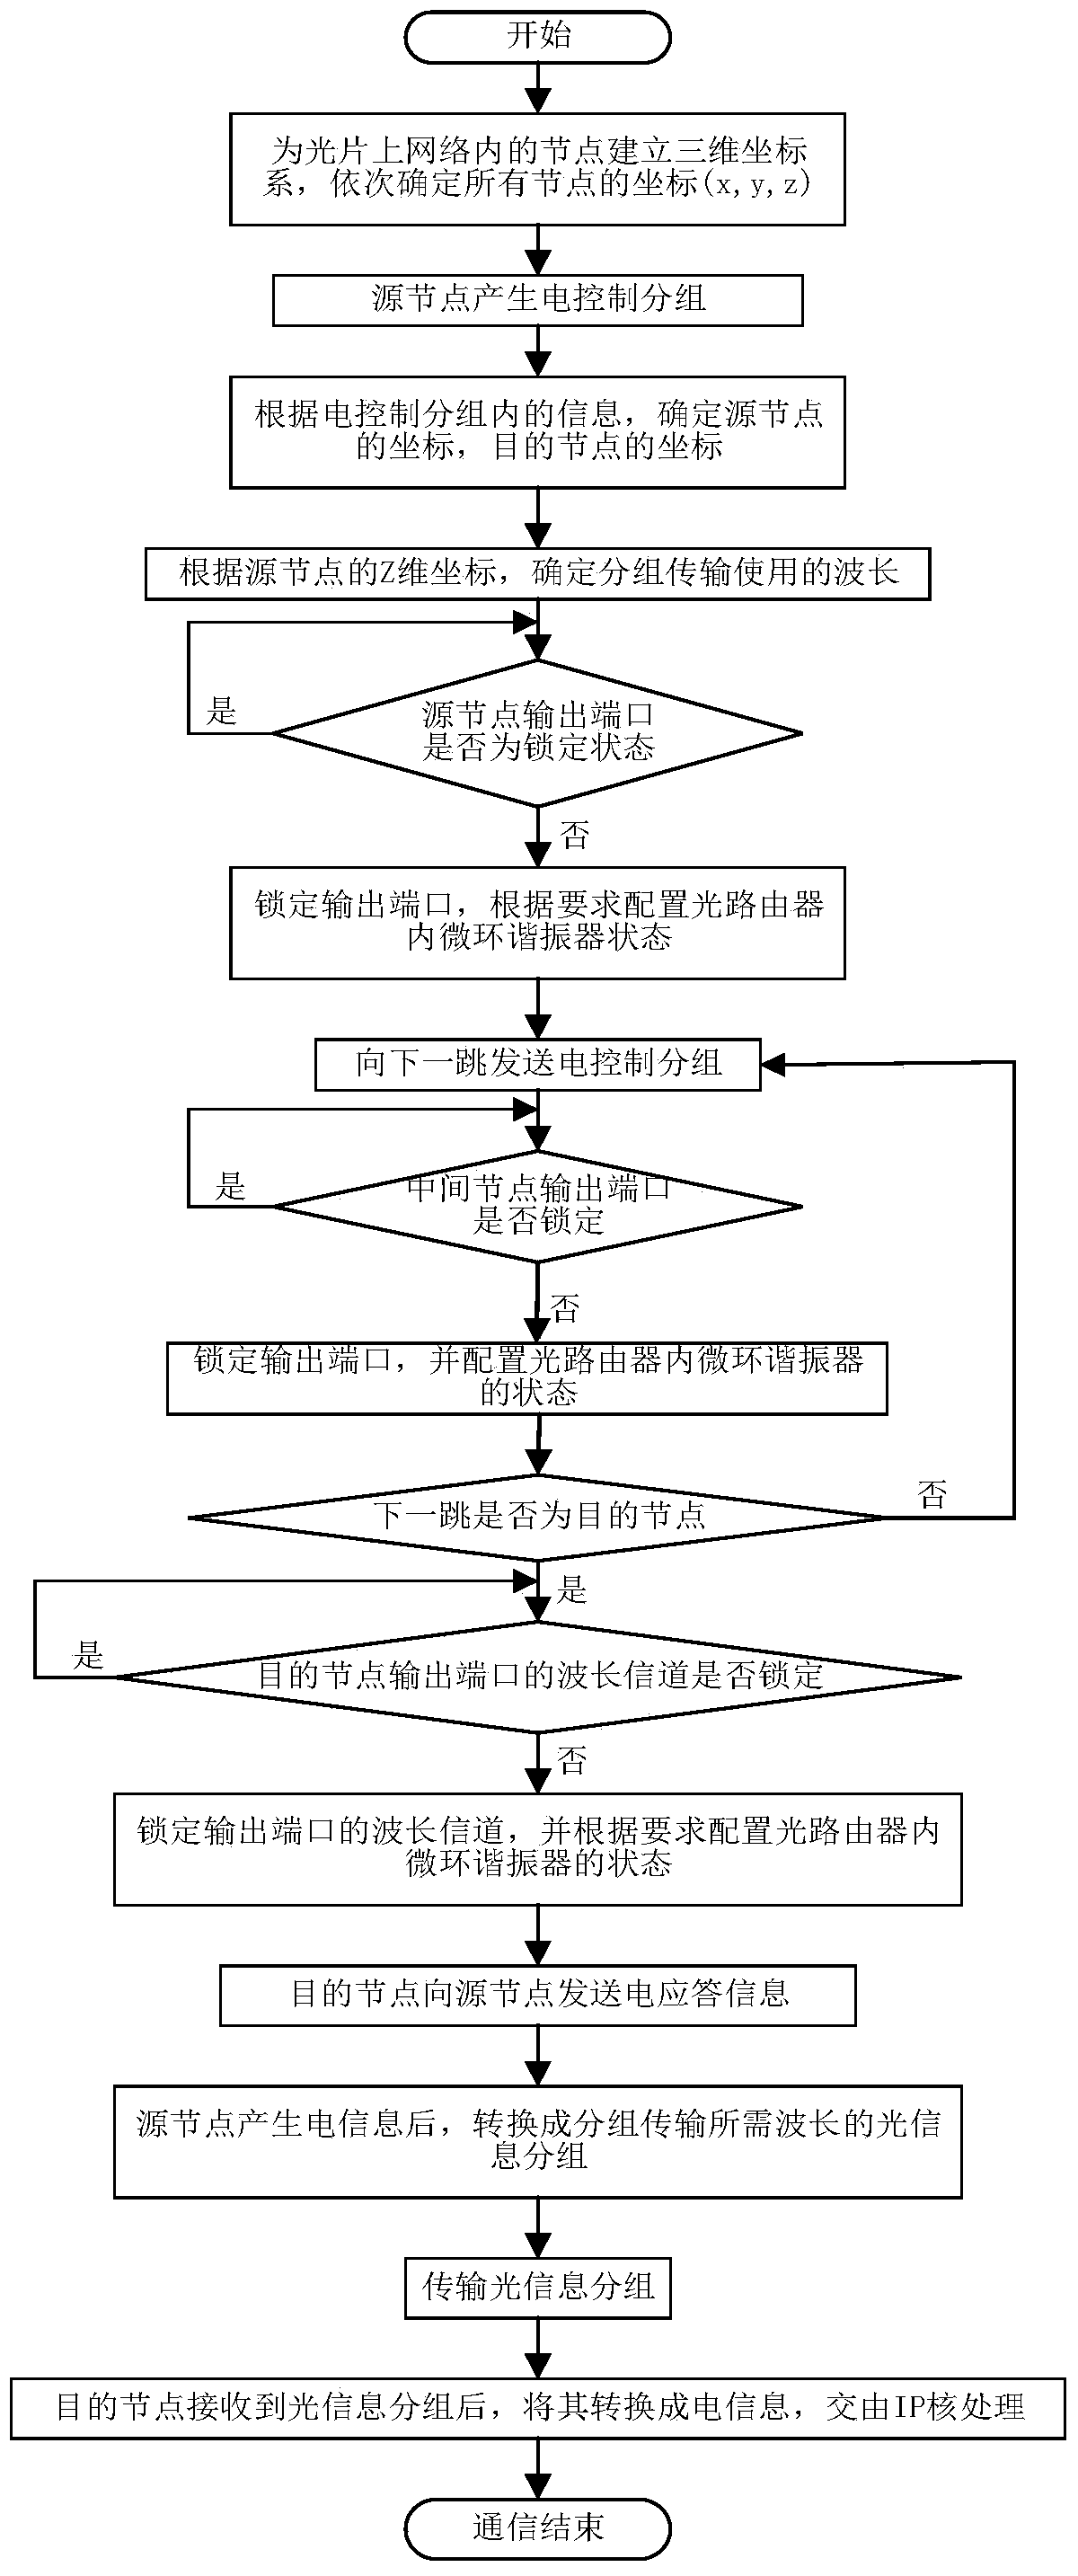 Three-dimensional optical network-on-chip router communication system and method based on wavelength allocation